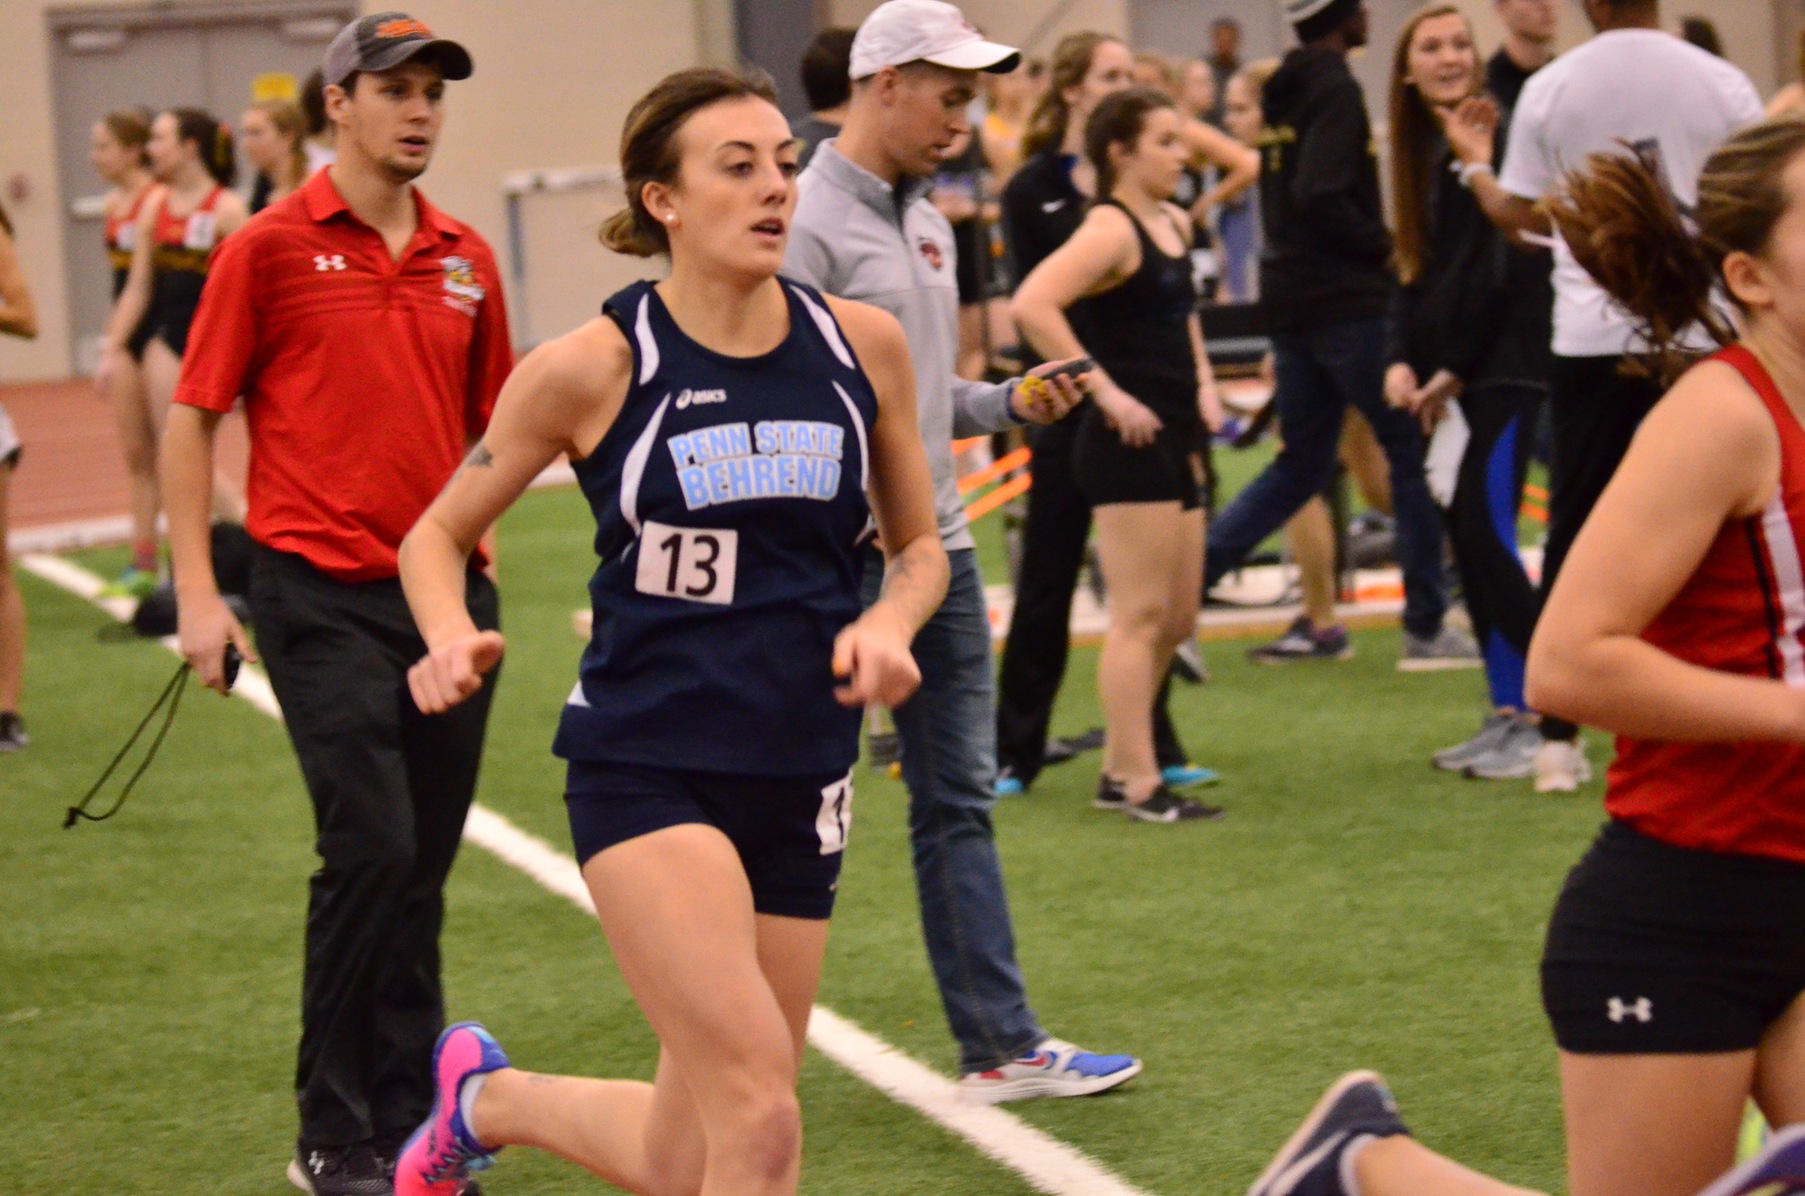 Lions Excel at Behrend Invitational